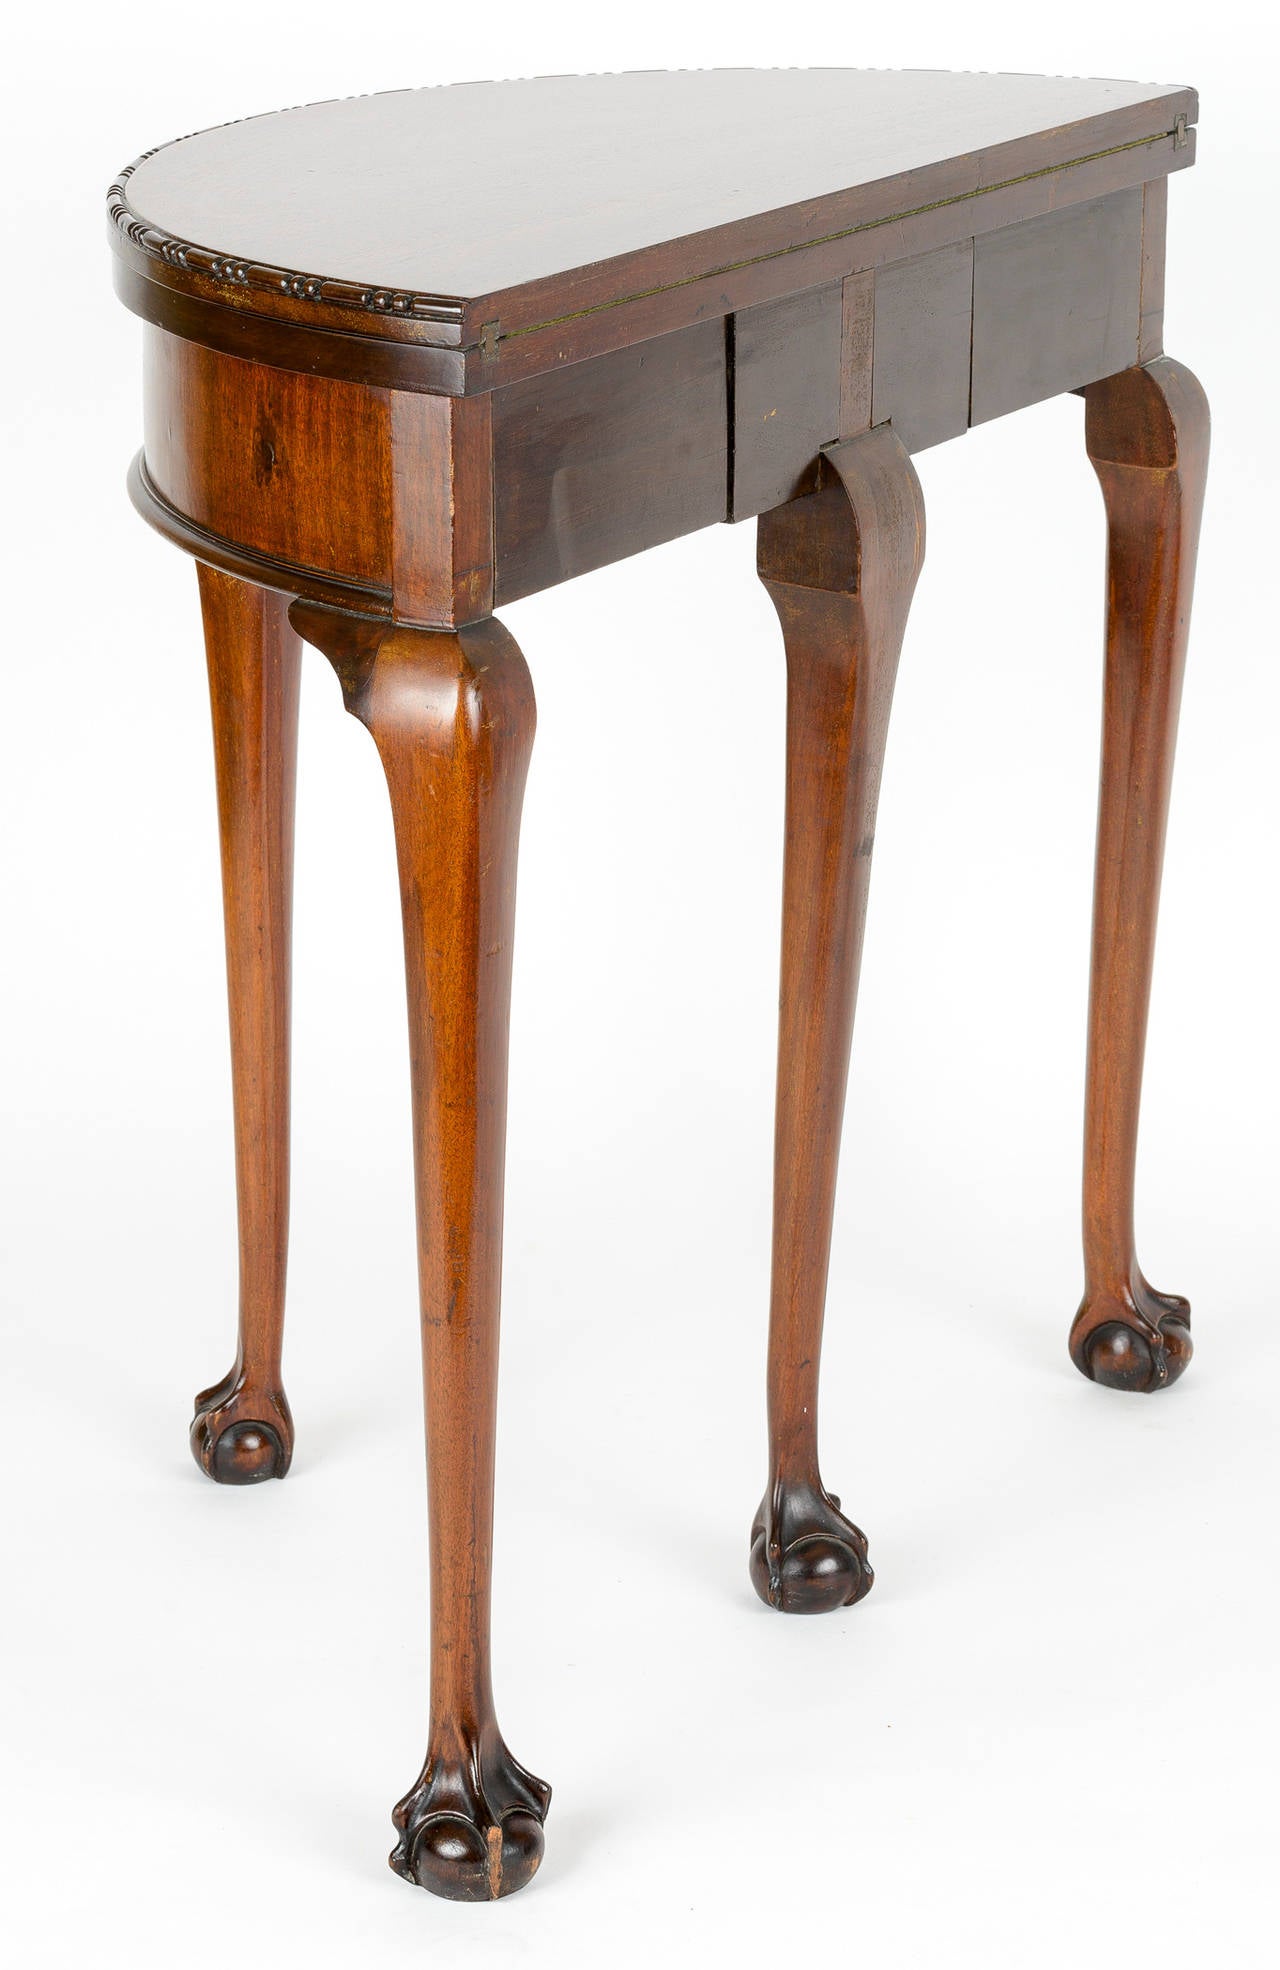 Mahogany George III demilune game table. The face top has bead detail edge.
The elongated cabriolet legs end in a nicely articulated ball and webbed foot. The fourth leg extends to support the open top and to expose a secret drawer. The brass hinge